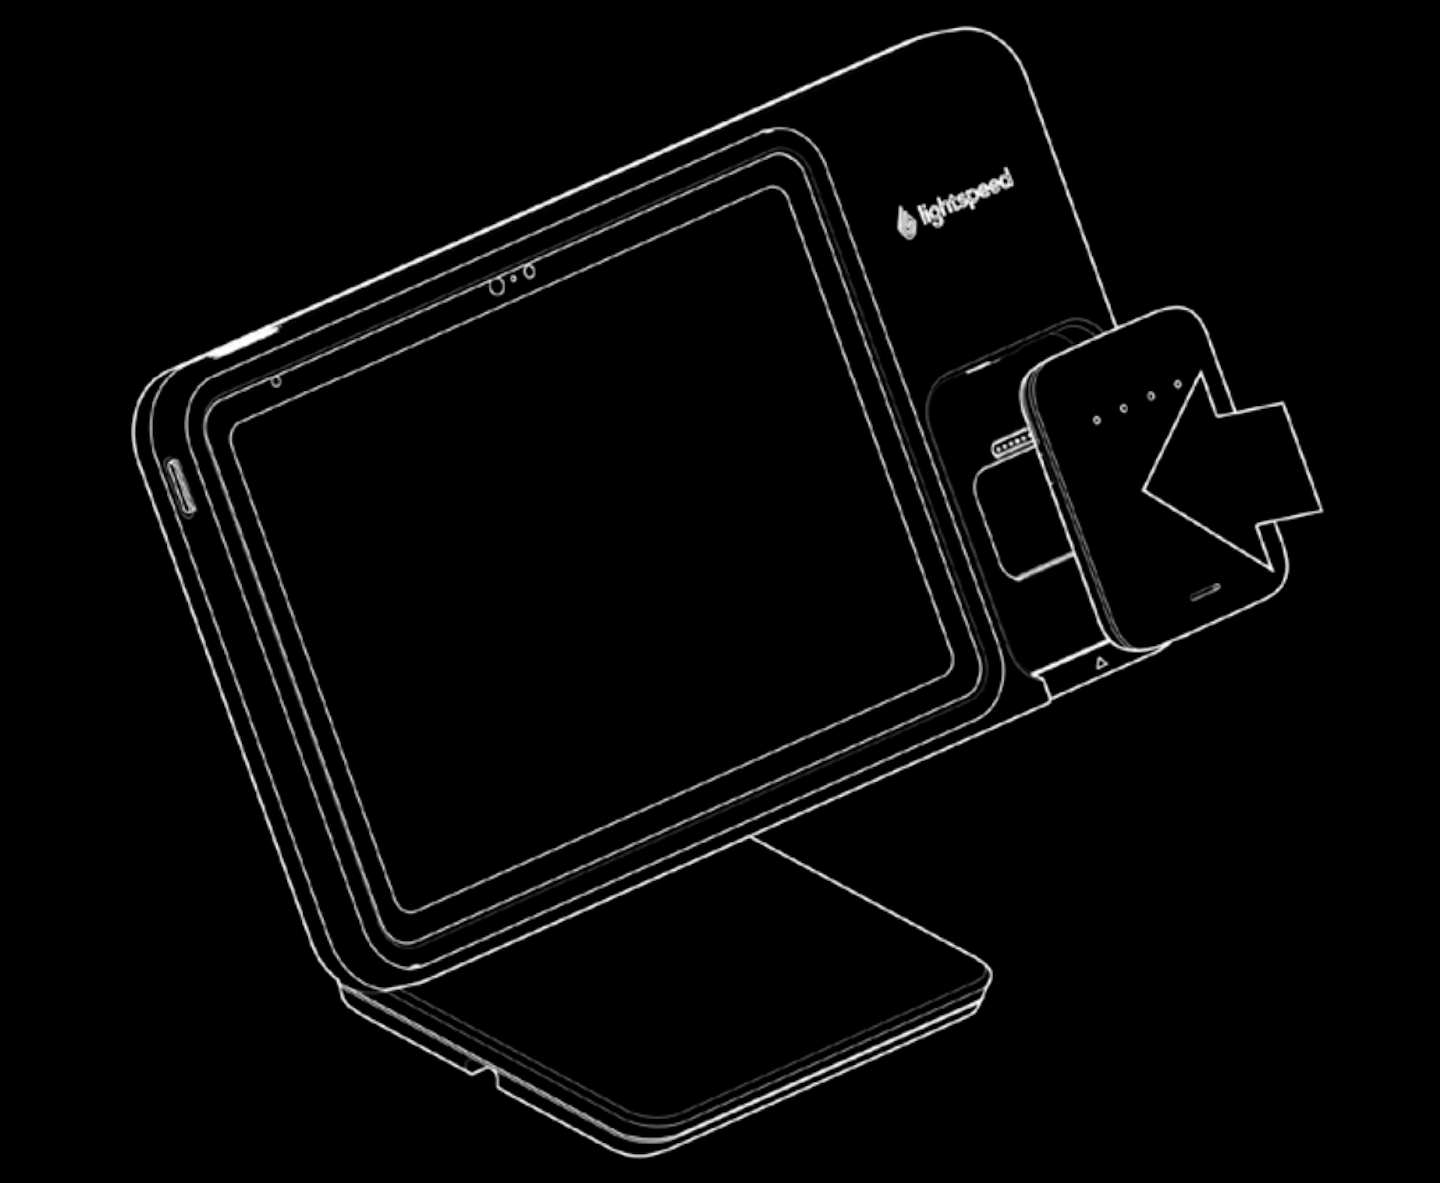 Illustration of Lightspeed Stand with Payments with Mobile Tap Reader being placed in the cut-out section.